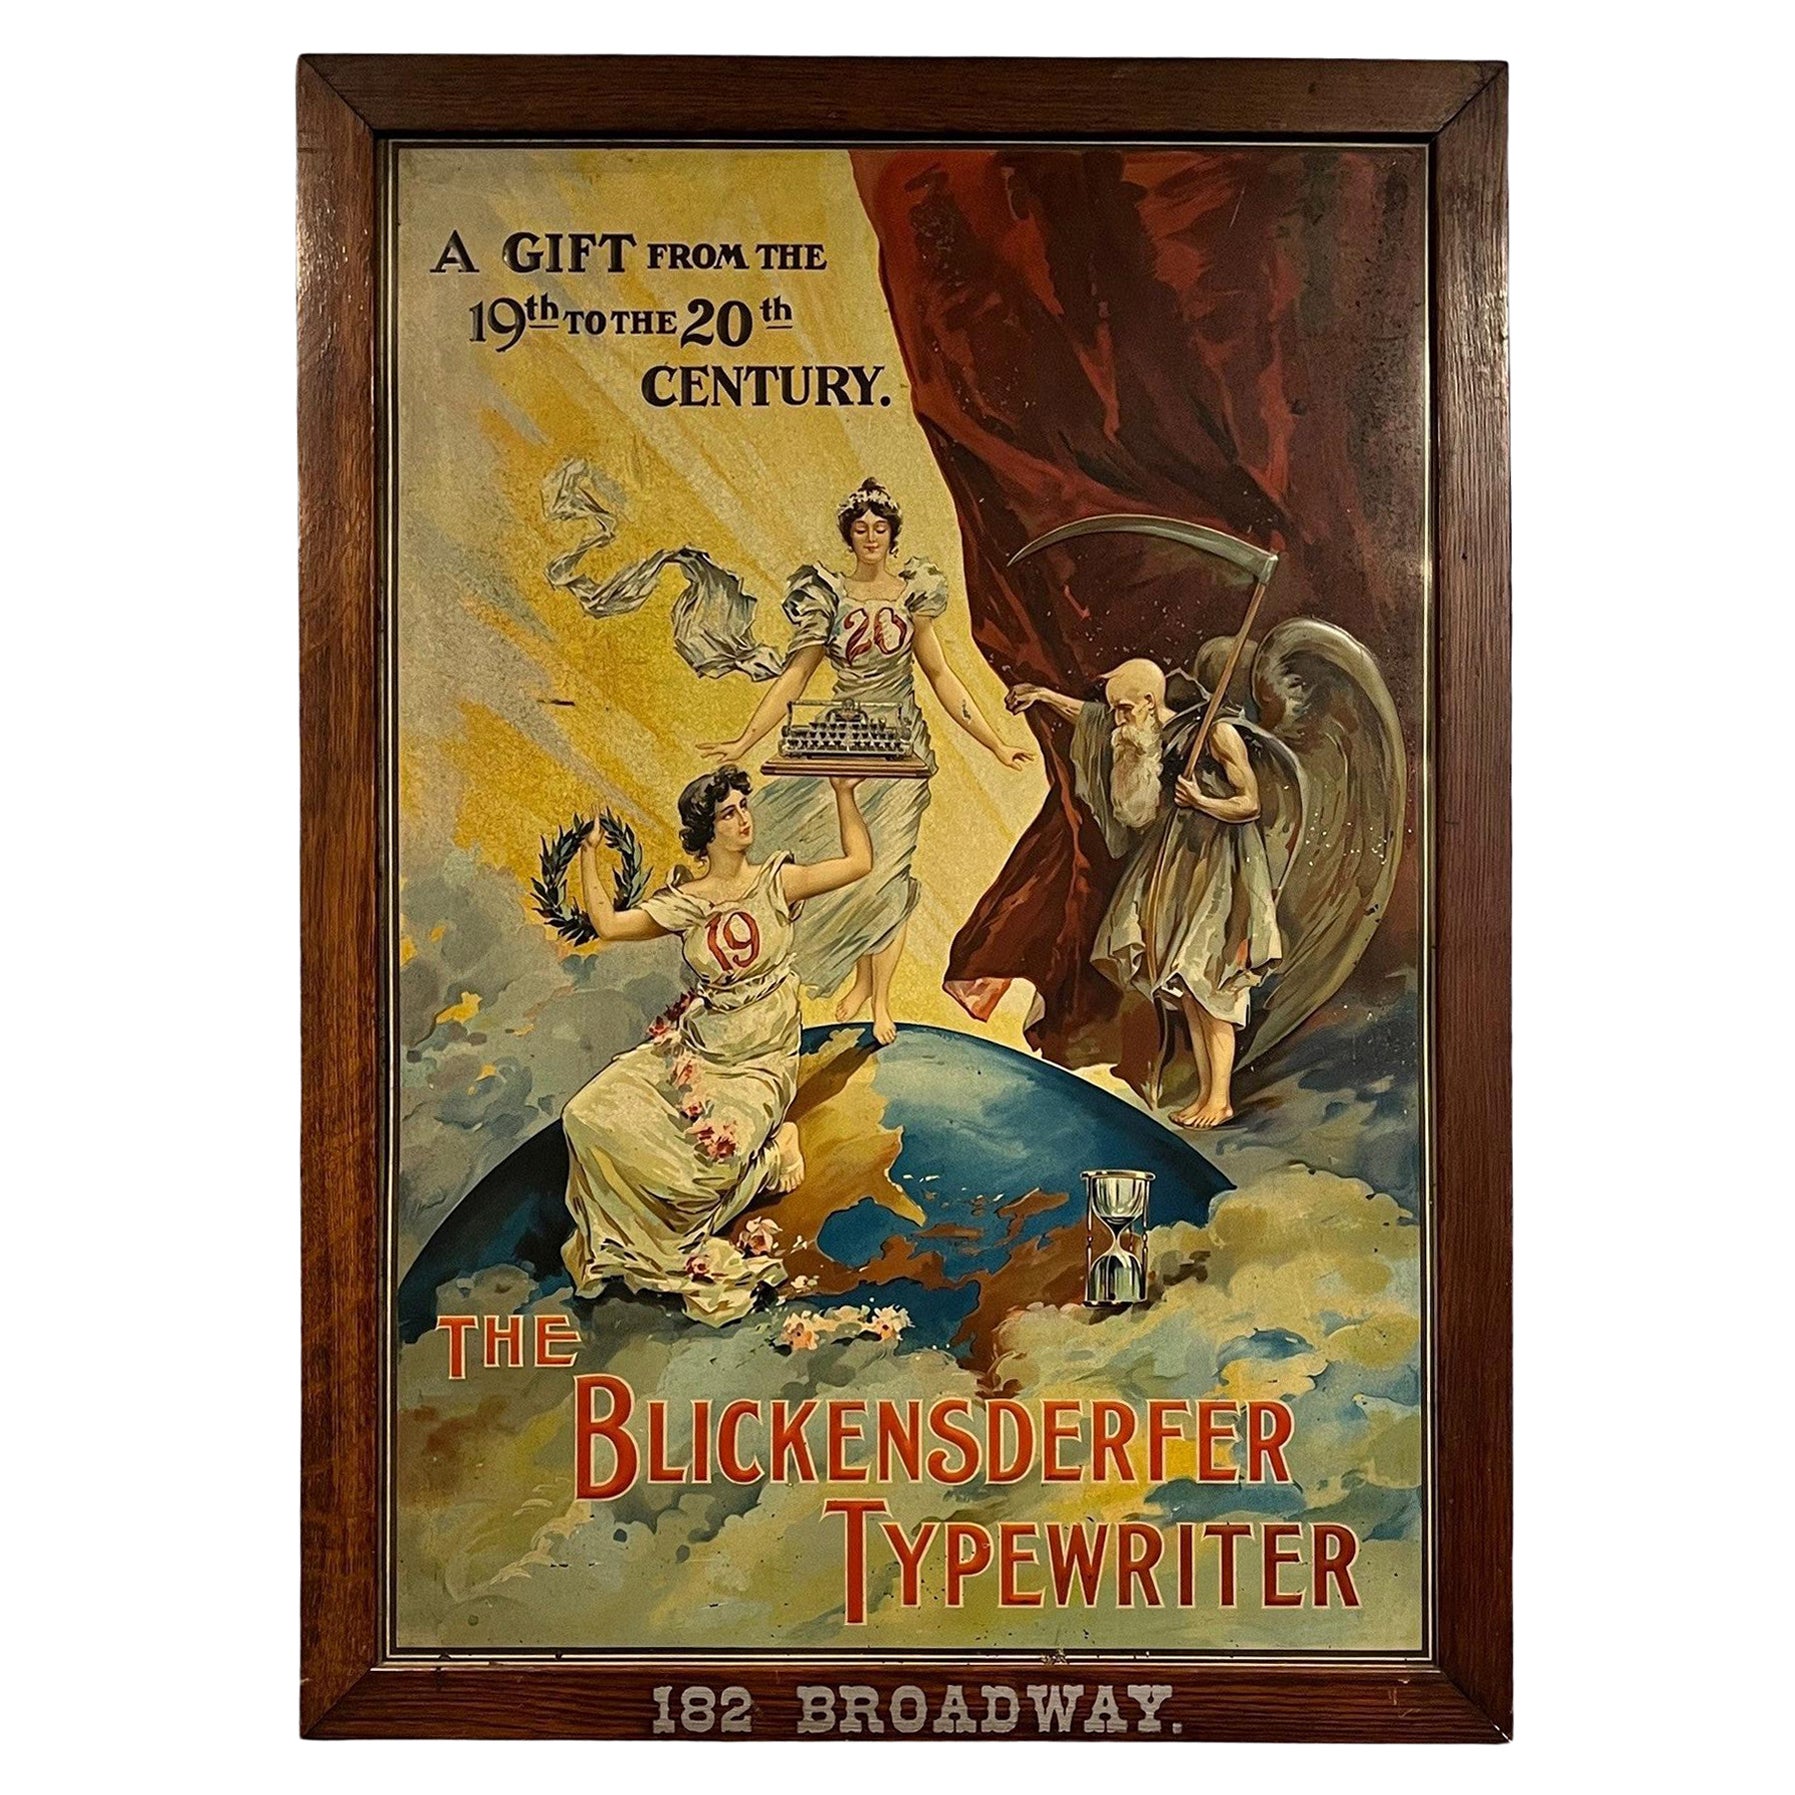 Blickensderfer Typewriter Tin Sign "A Gift from the 19th to the 20th Century"